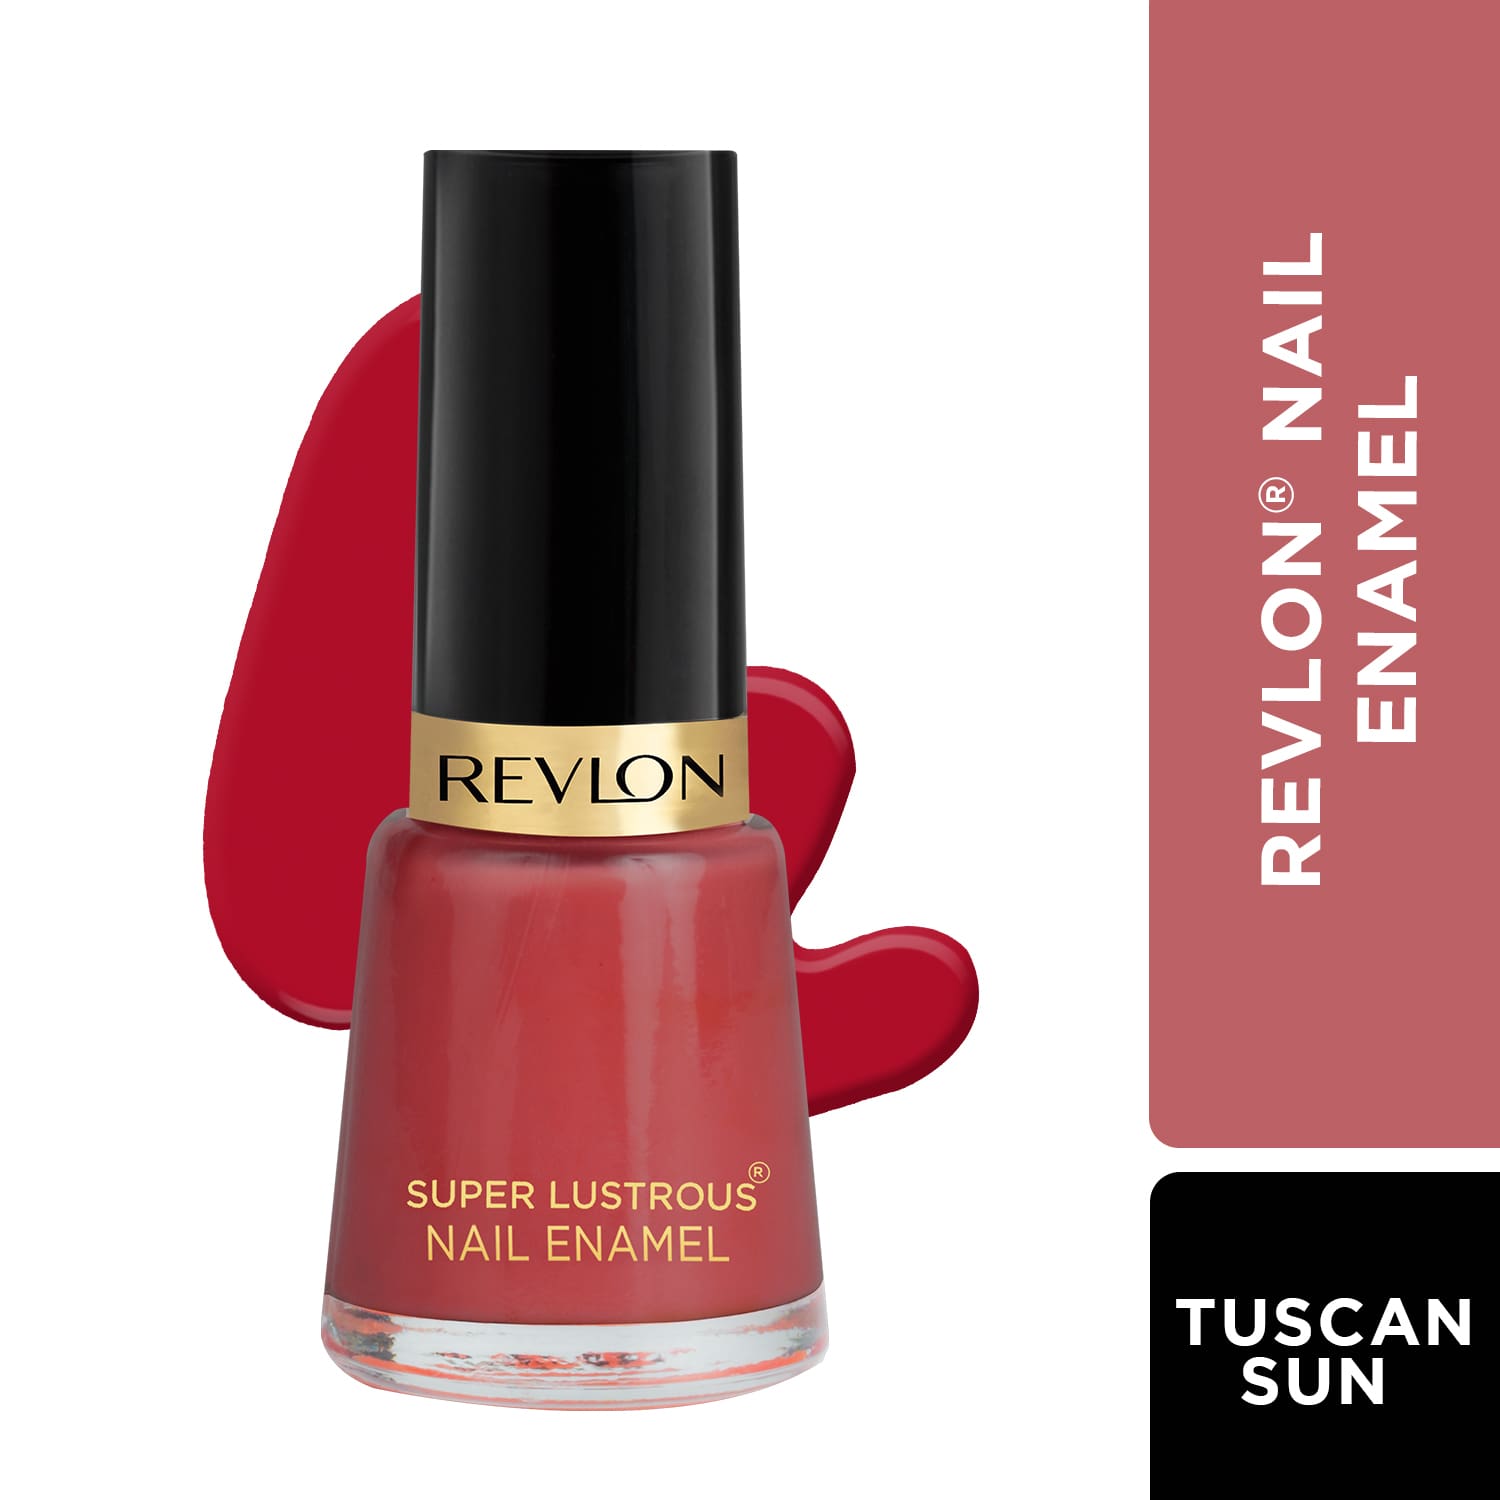 Buy Revlon Nail Enamel, Chip Resistant Nail Polish, Glossy Shine Finish, in  Pink, 290 Optimistic, 0.5 oz Online at Low Prices in India - Amazon.in